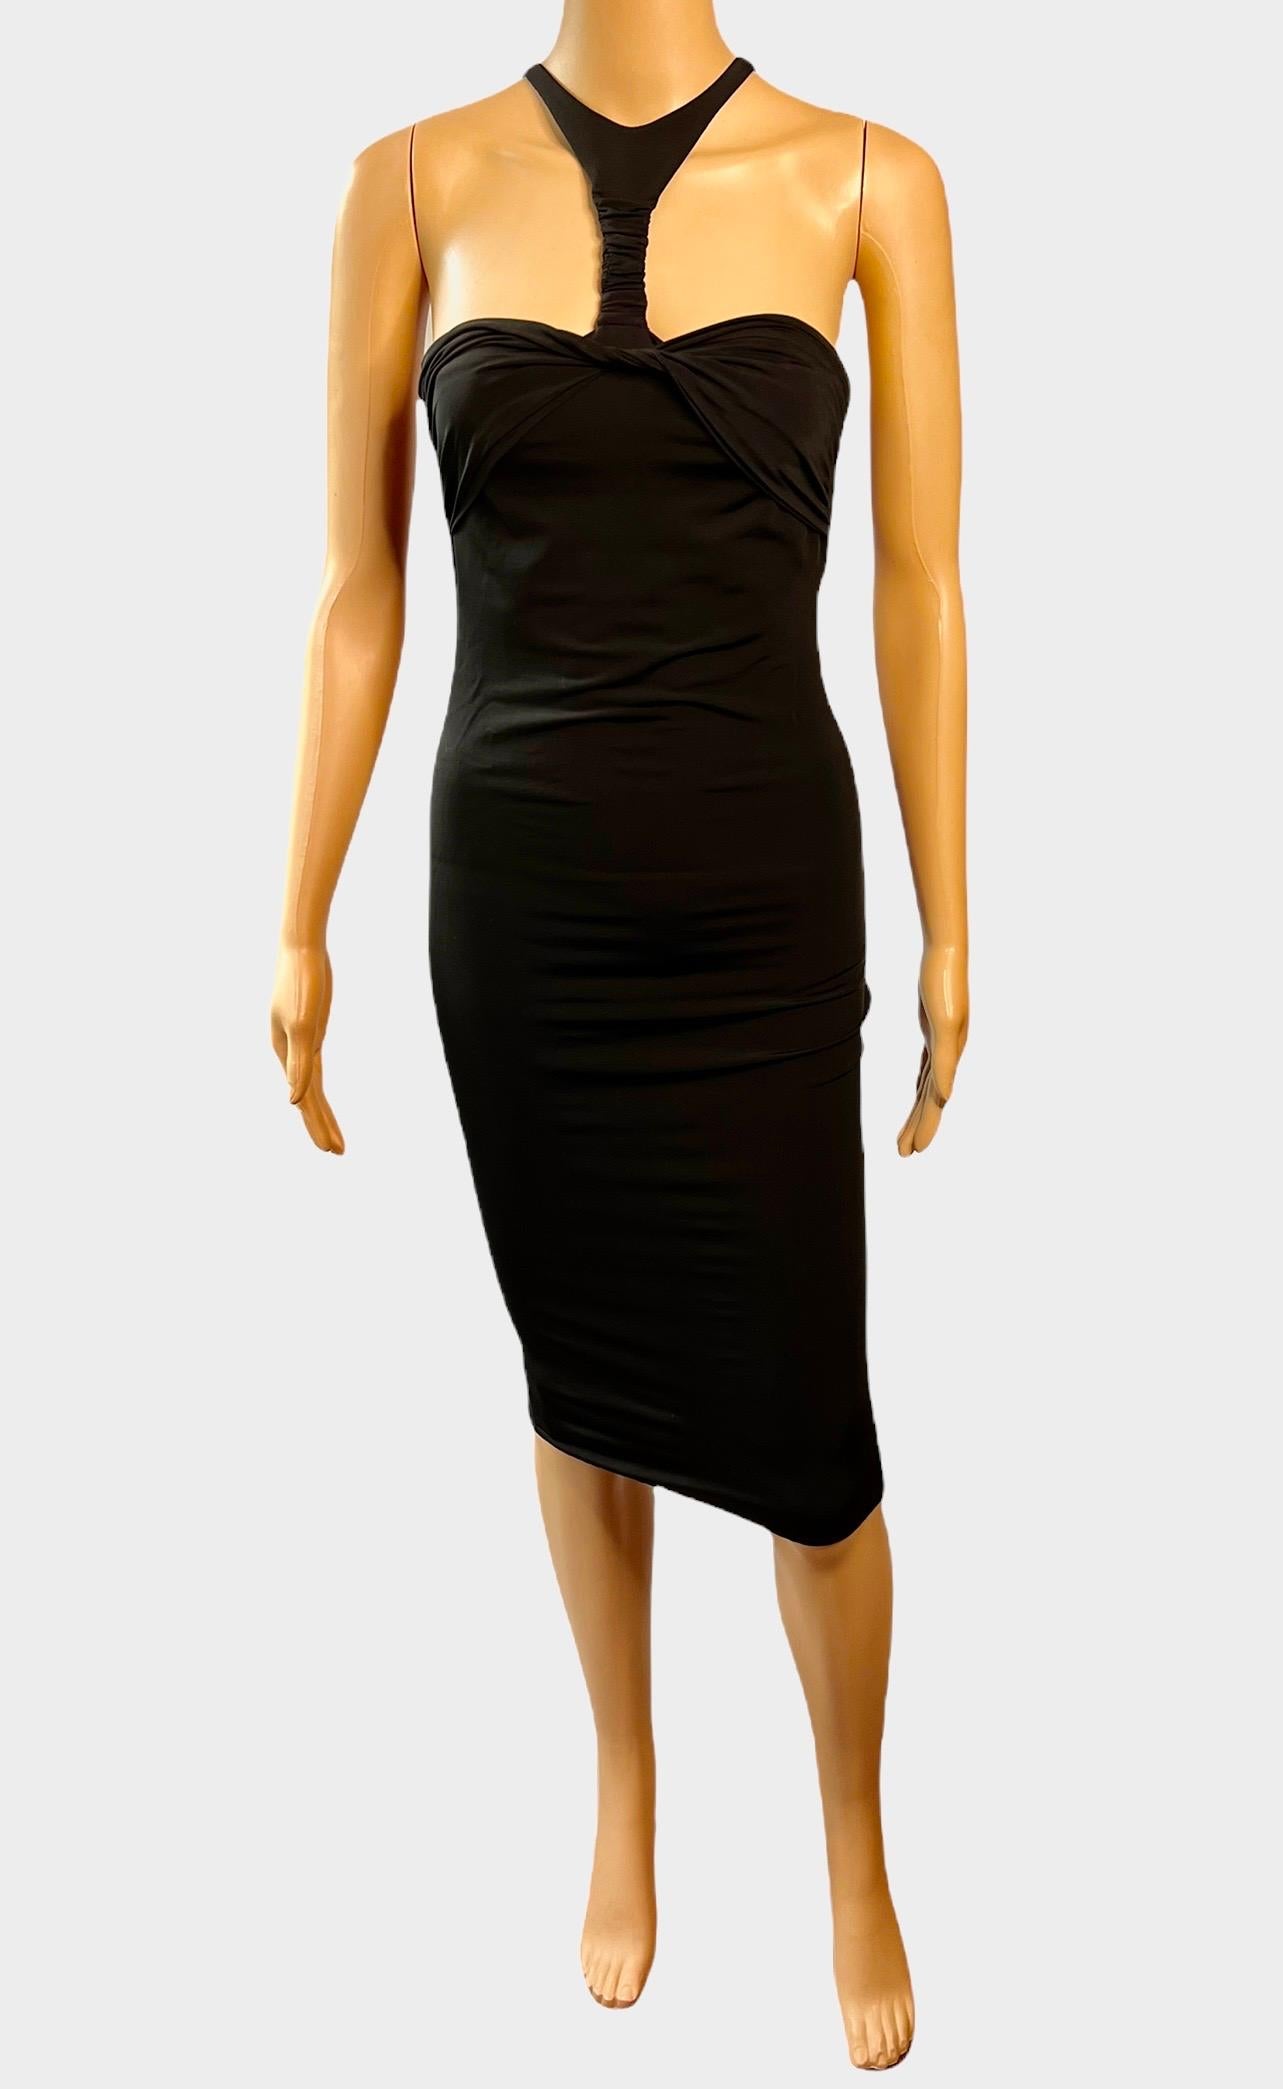 tom ford dress with zipper